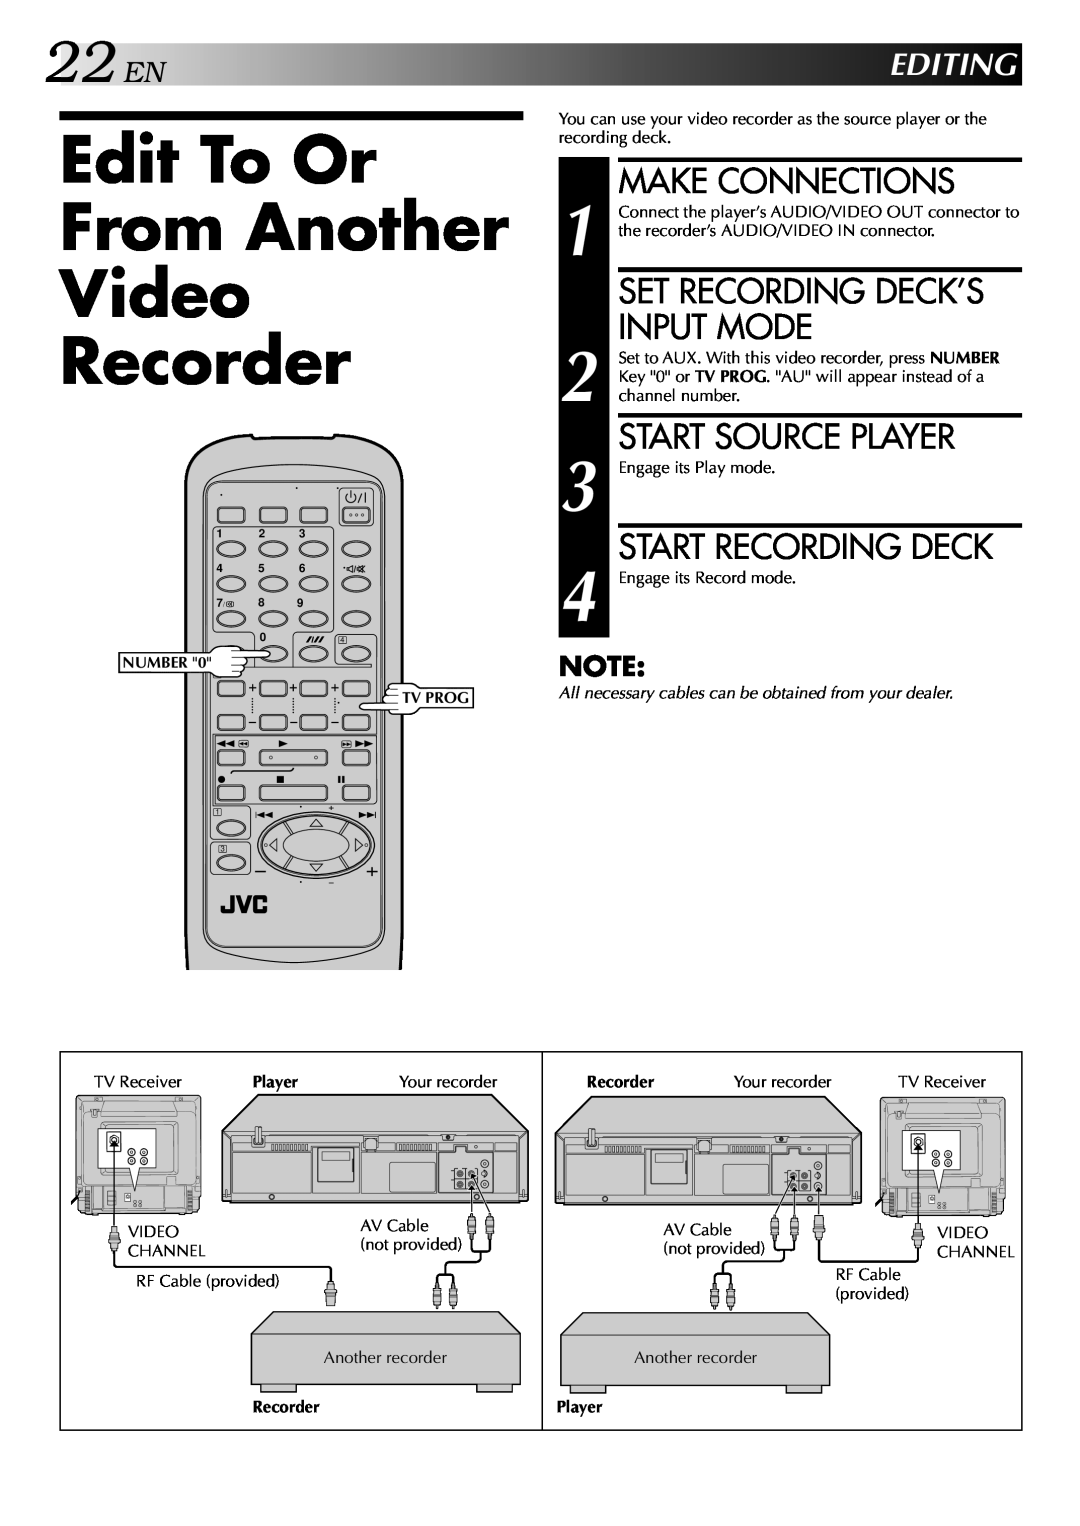 JVC HR-J245EA Edit To Or From Another Video Recorder, 22EN, Make Connections, Set Recording Deck’S Input Mode, Editing 